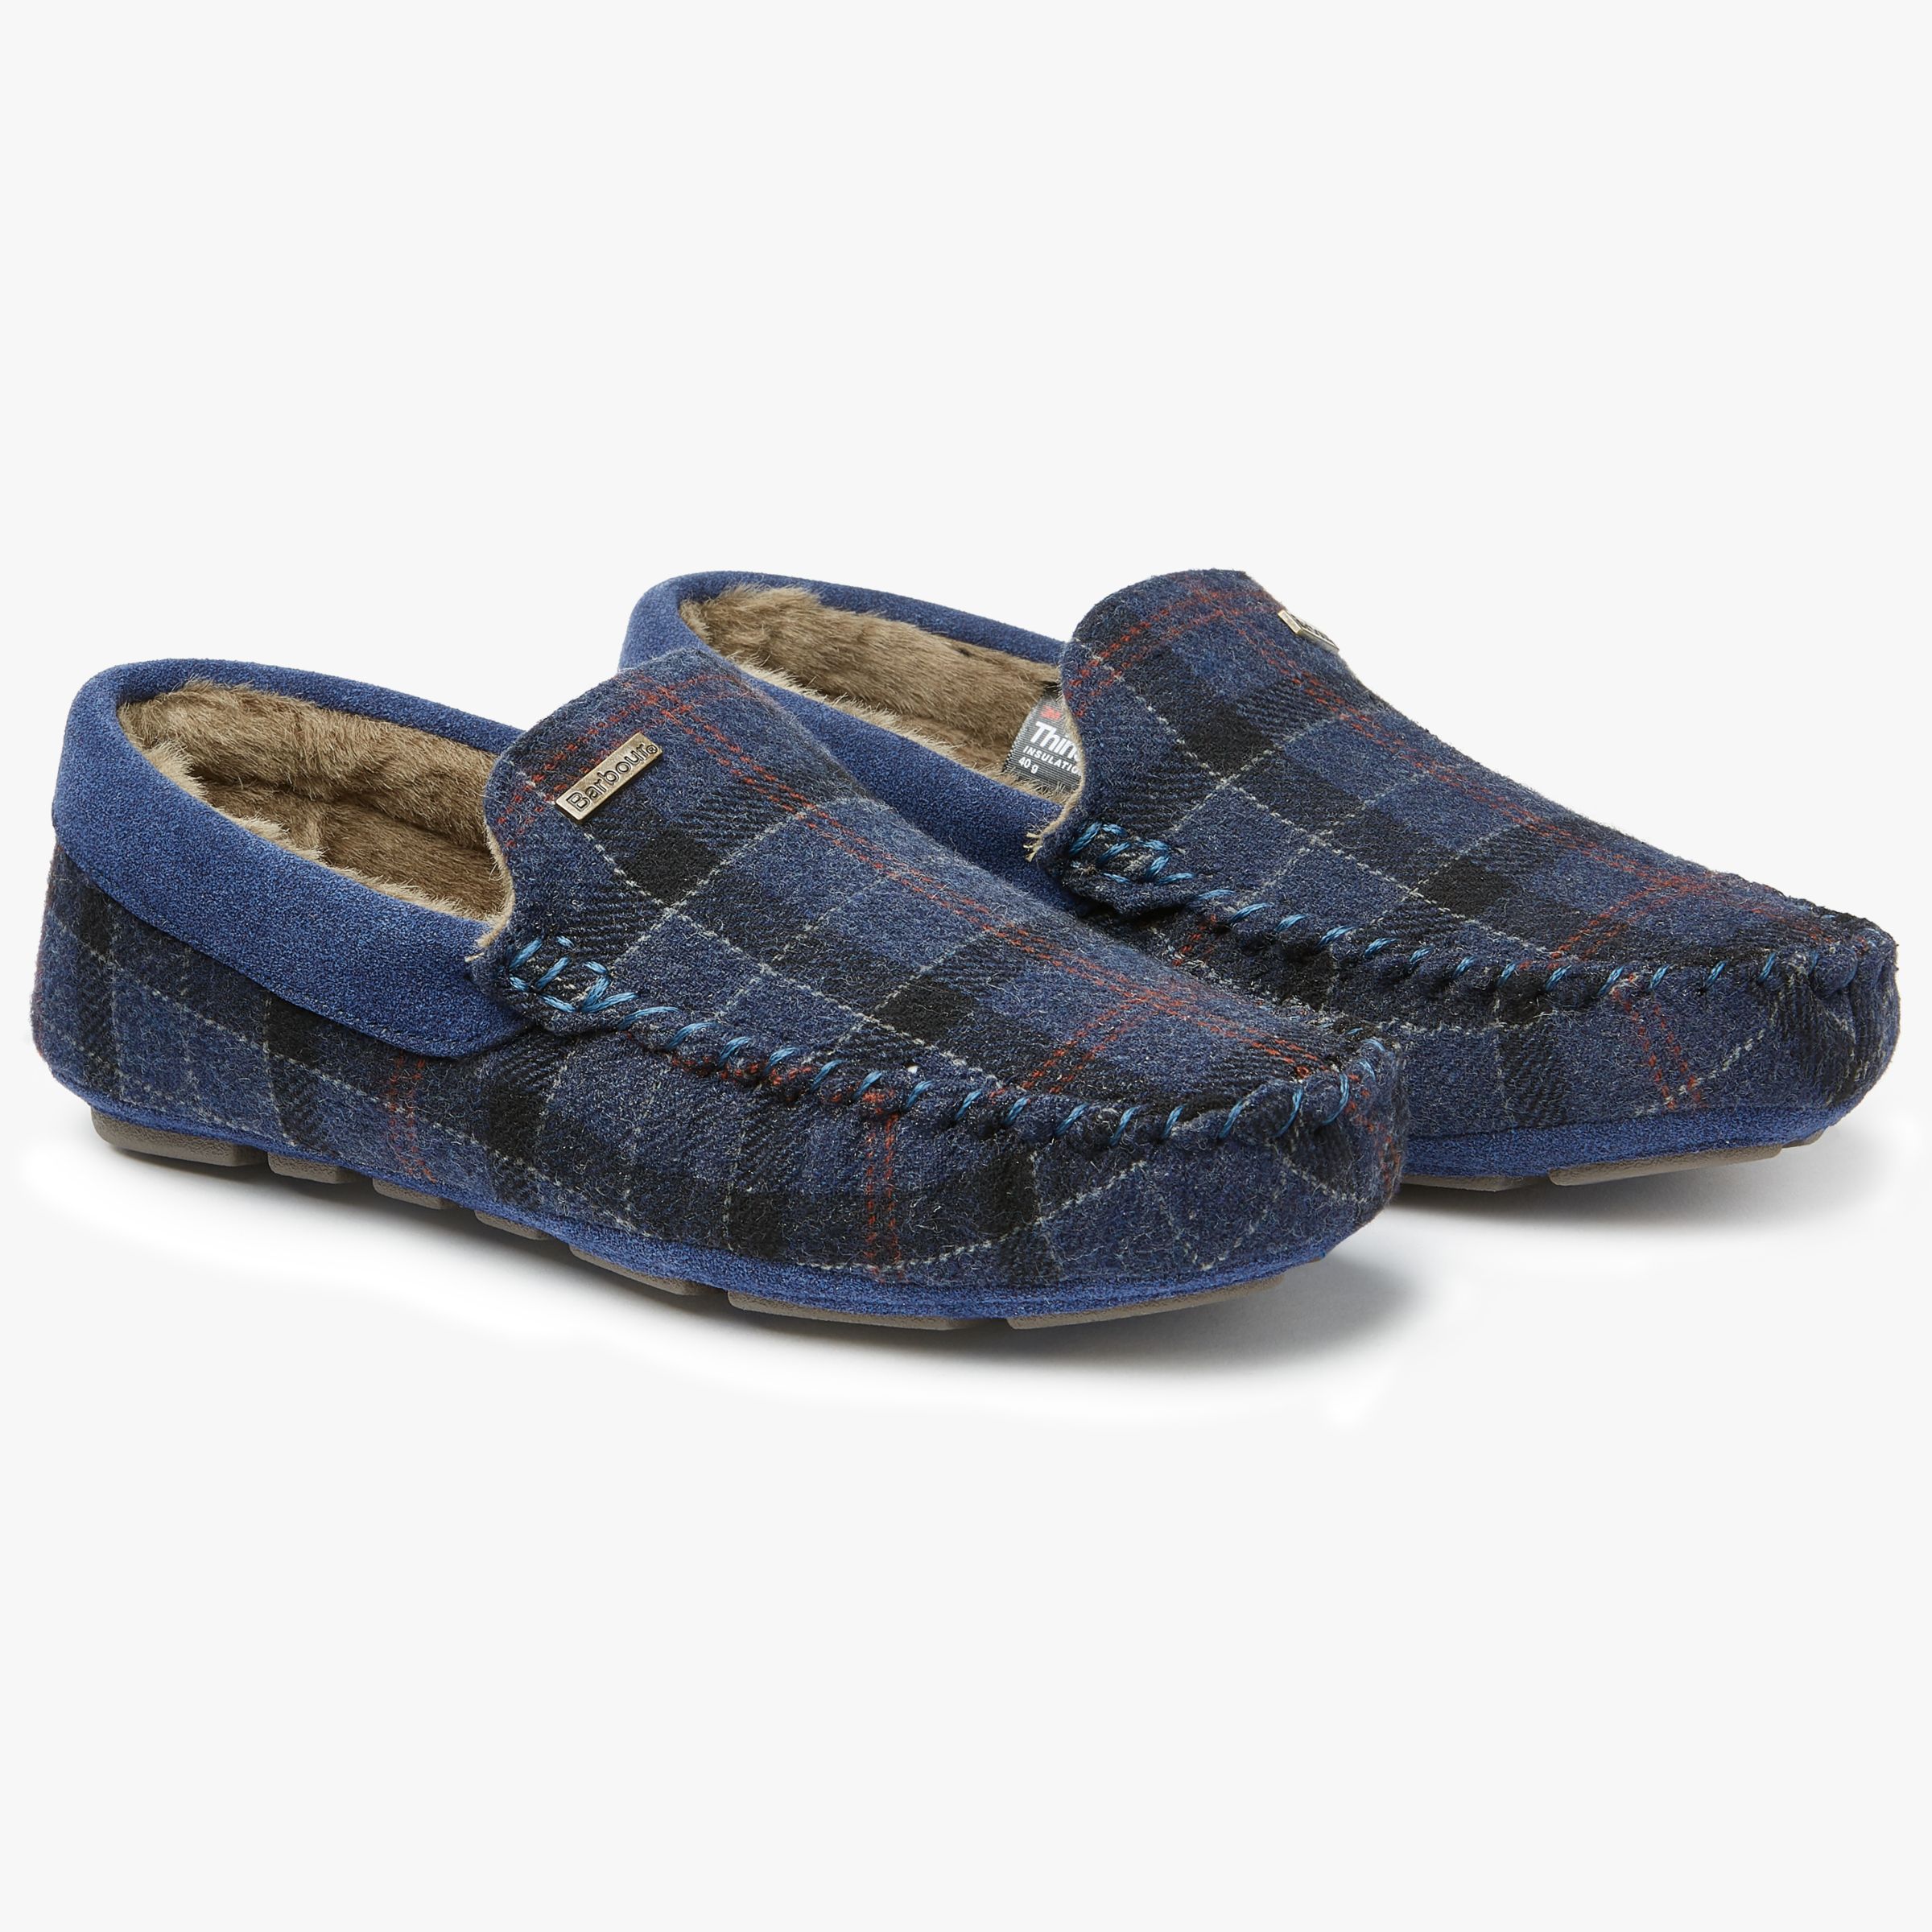 Barbour Thinsulate Tartan Slippers at 